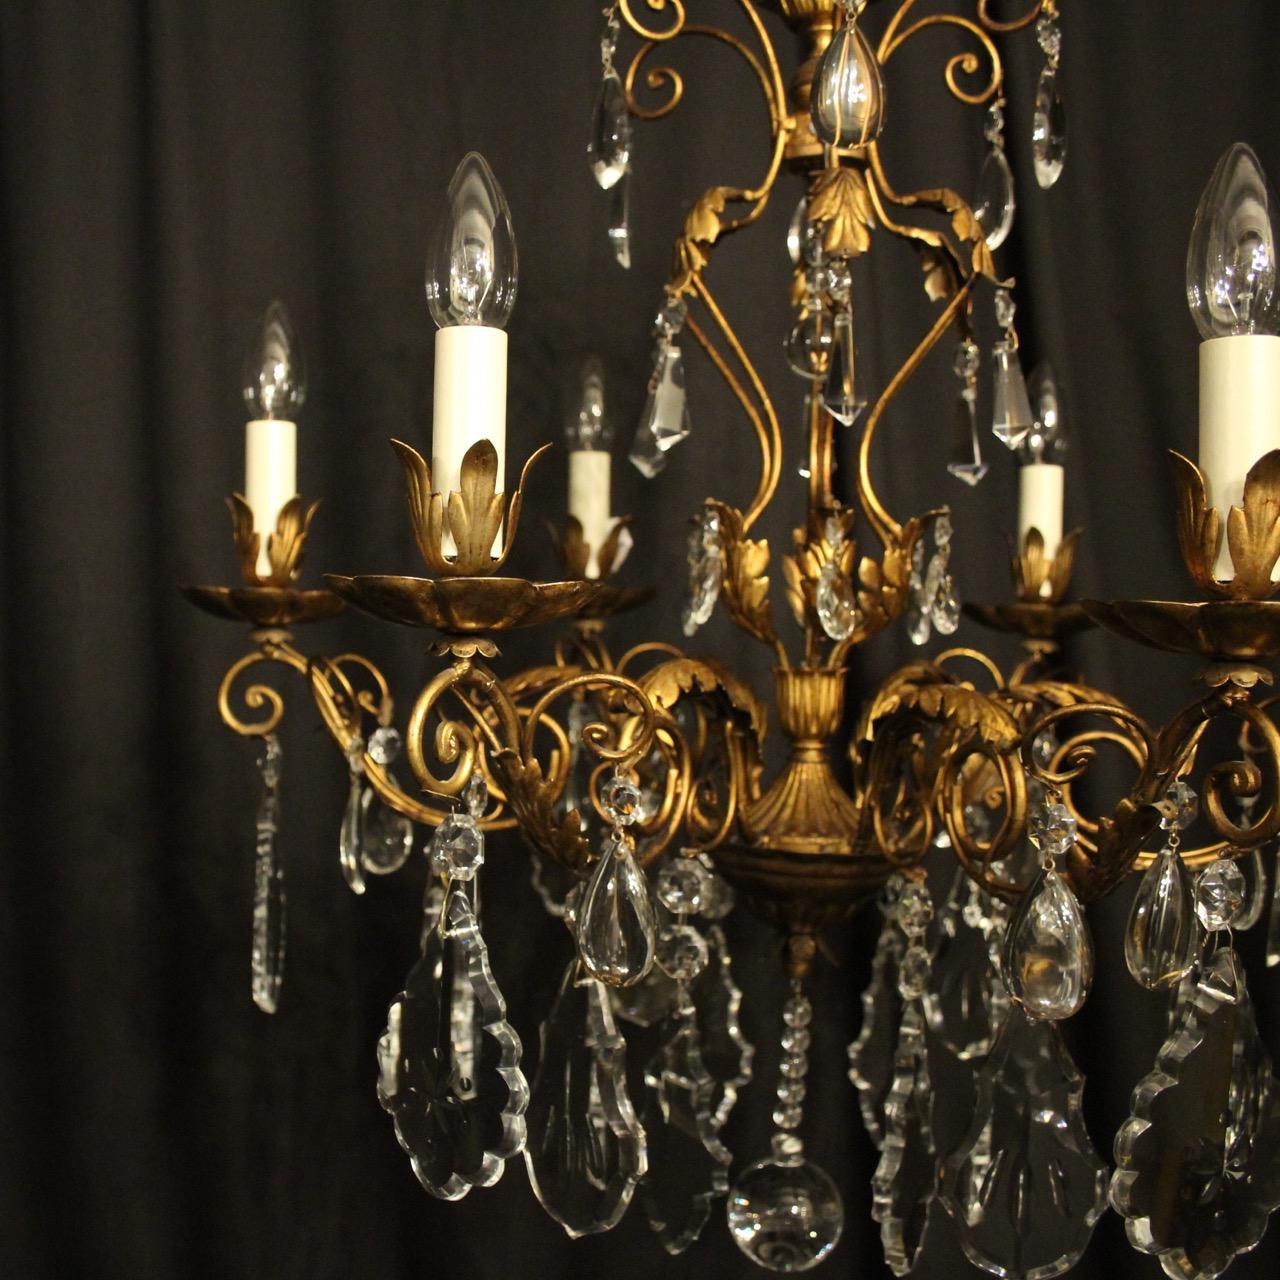 A decorative Italian gilded and crystal 6-light chandelier, the leaf scrolling arms with foliated bobeche drip pans and leaf candle sconces, issuing from a cage form leaf clad wirework interior with scrolling wirework canopy, decorated with nice